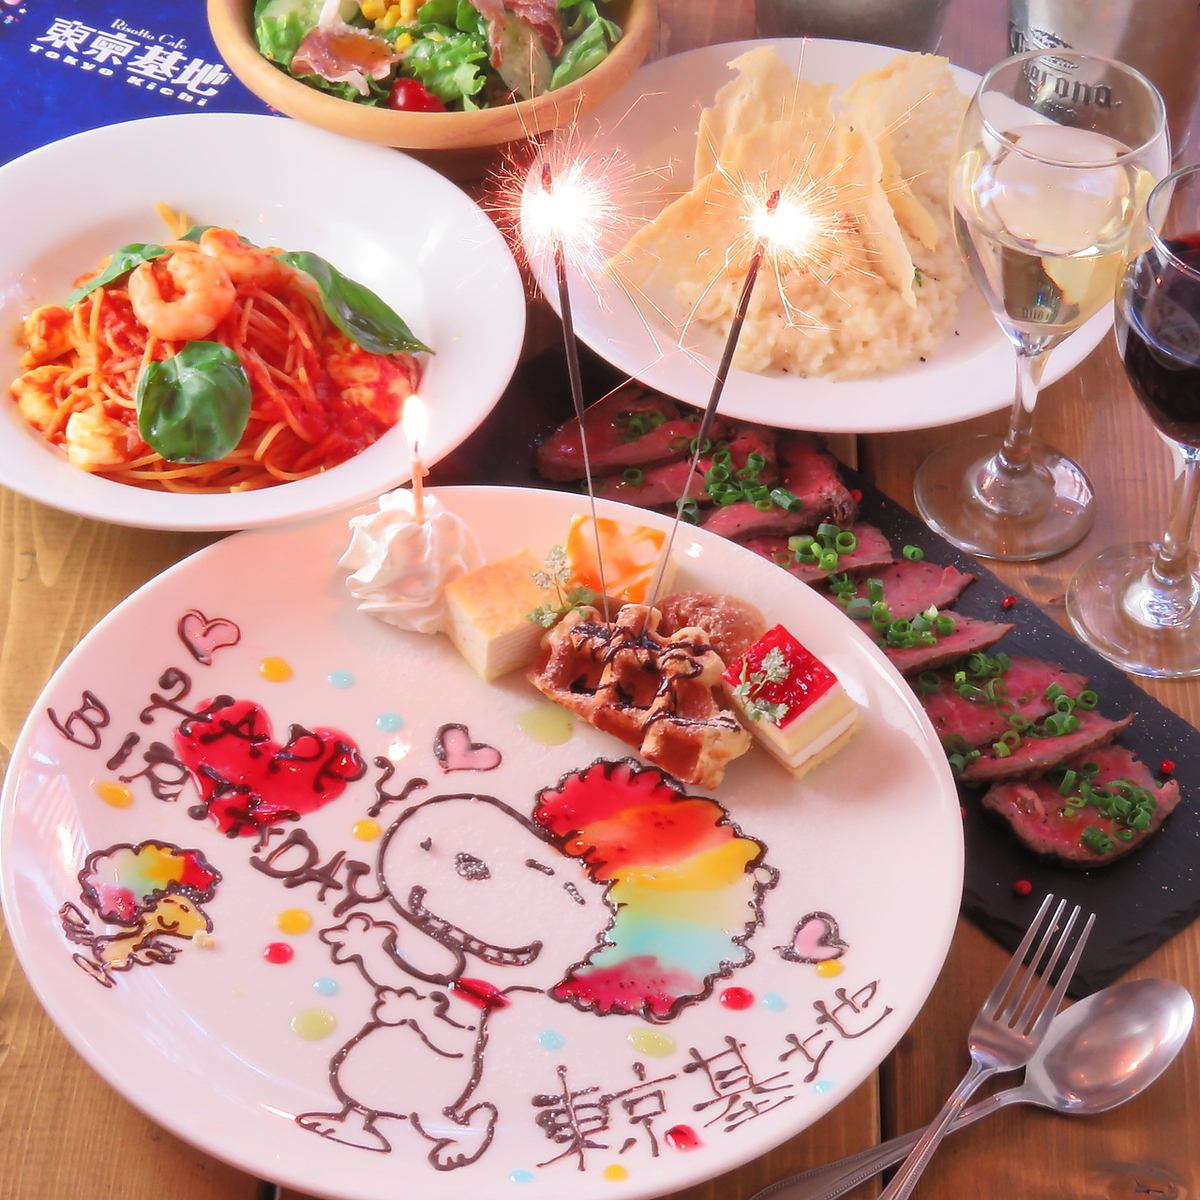 [For celebratory occasions] Tokyo base's proud character dessert plate